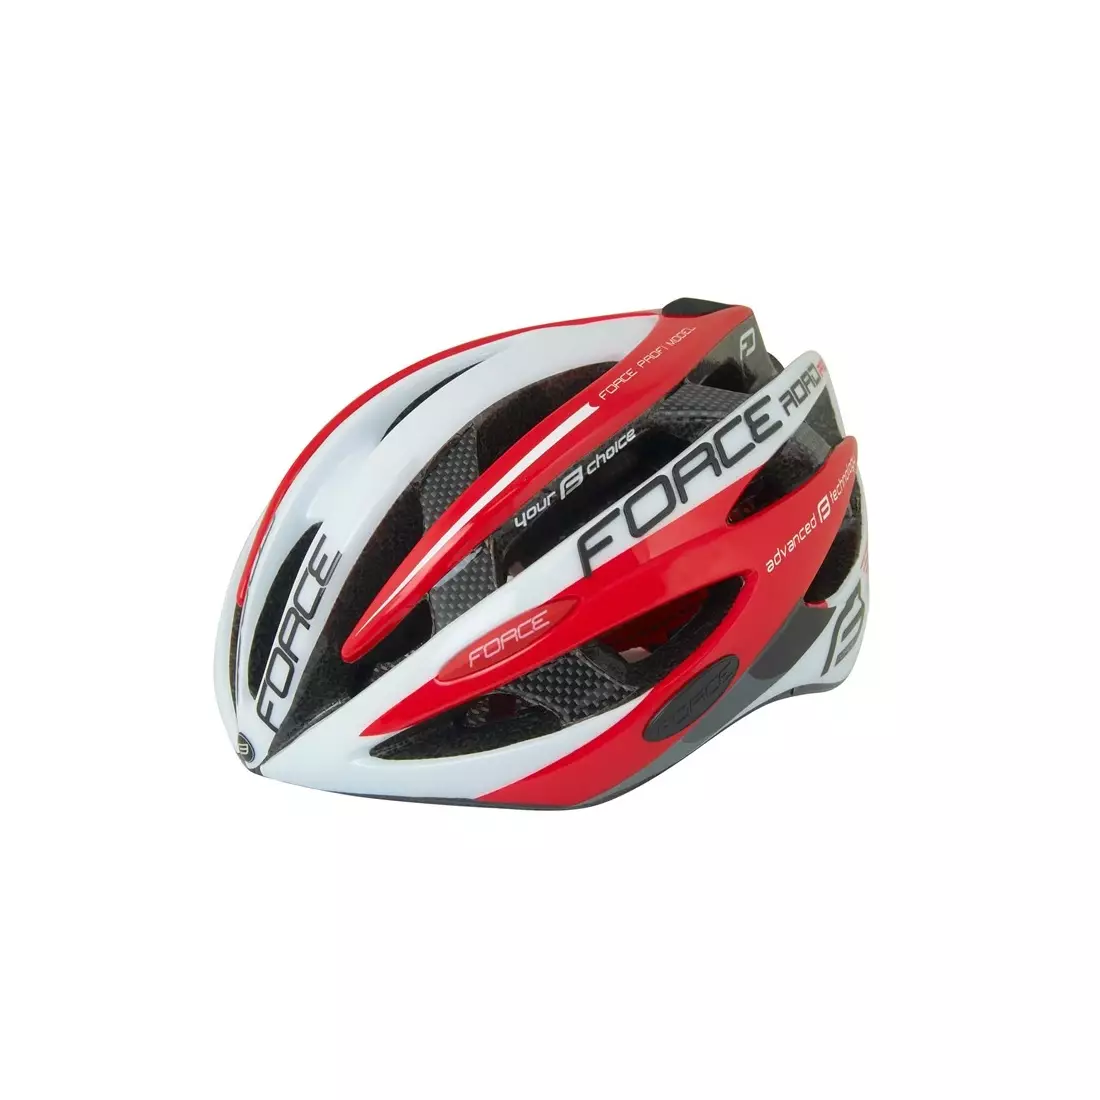 FORCE bicycle helmet ROAD PRO, White and red